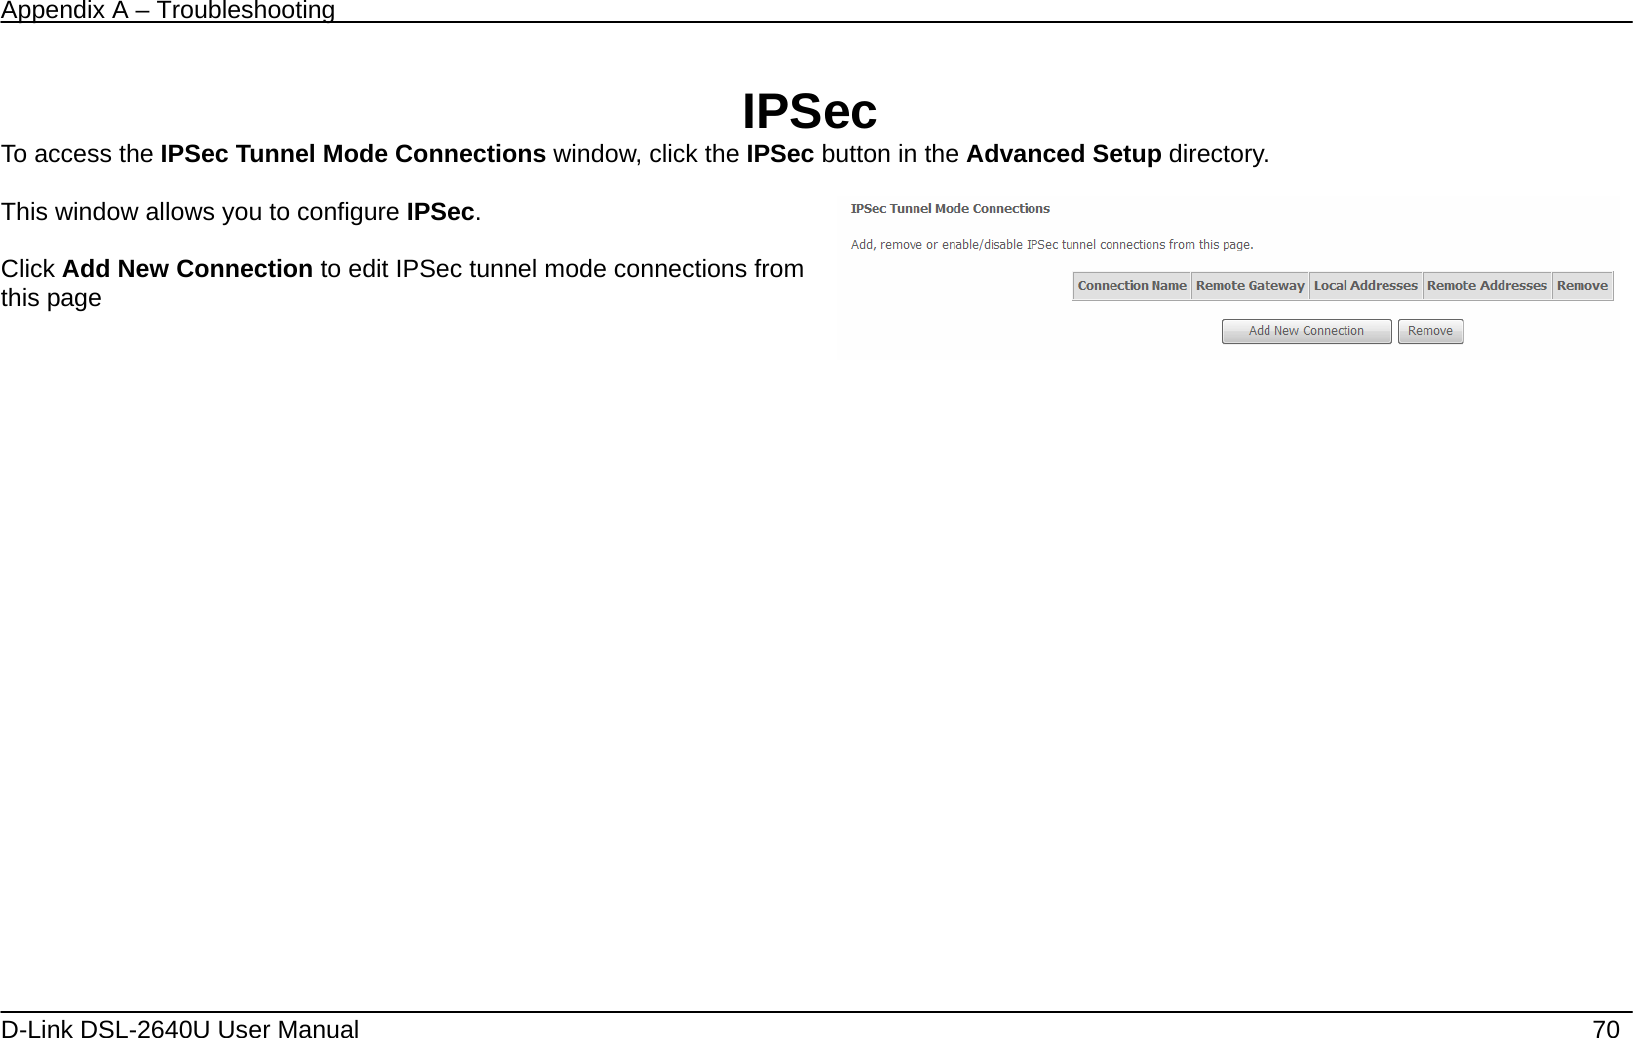 Appendix A – Troubleshooting   D-Link DSL-2640U User Manual    70  IPSec To access the IPSec Tunnel Mode Connections window, click the IPSec button in the Advanced Setup directory.  This window allows you to configure IPSec.  Click Add New Connection to edit IPSec tunnel mode connections from this page     